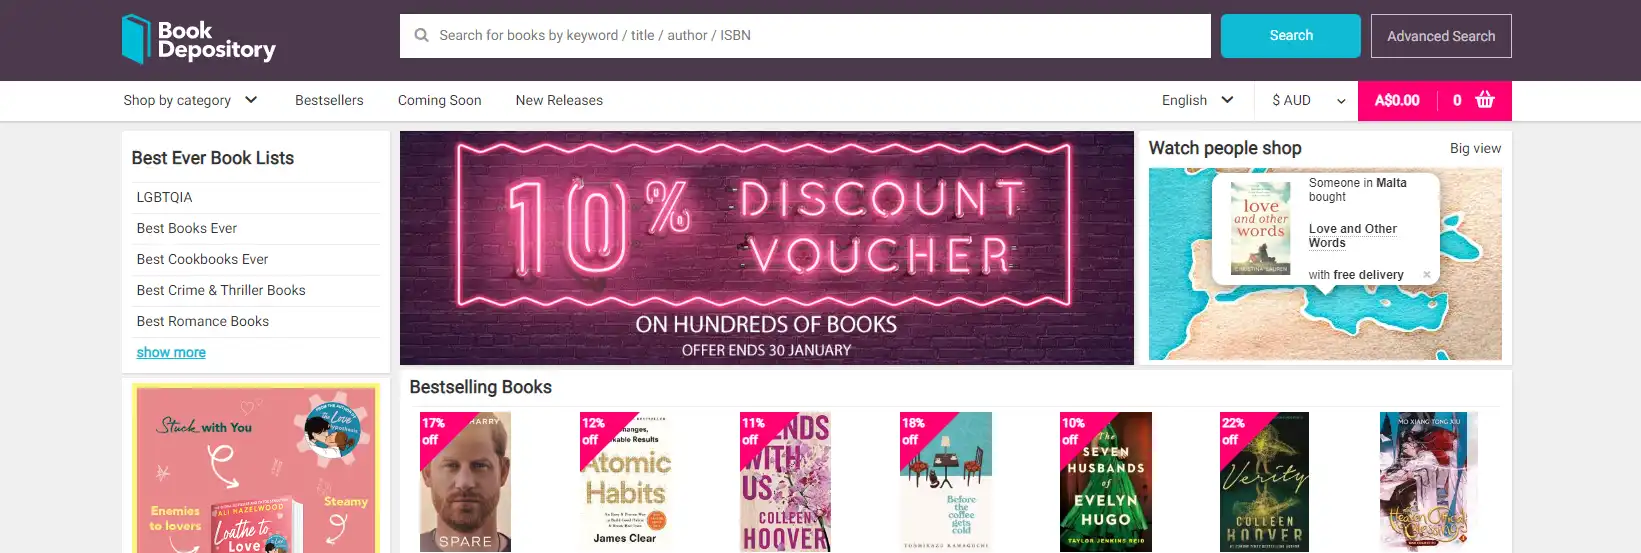 Extra 10% OFF on 100's of books + Free delivery with promo code @ book Depository